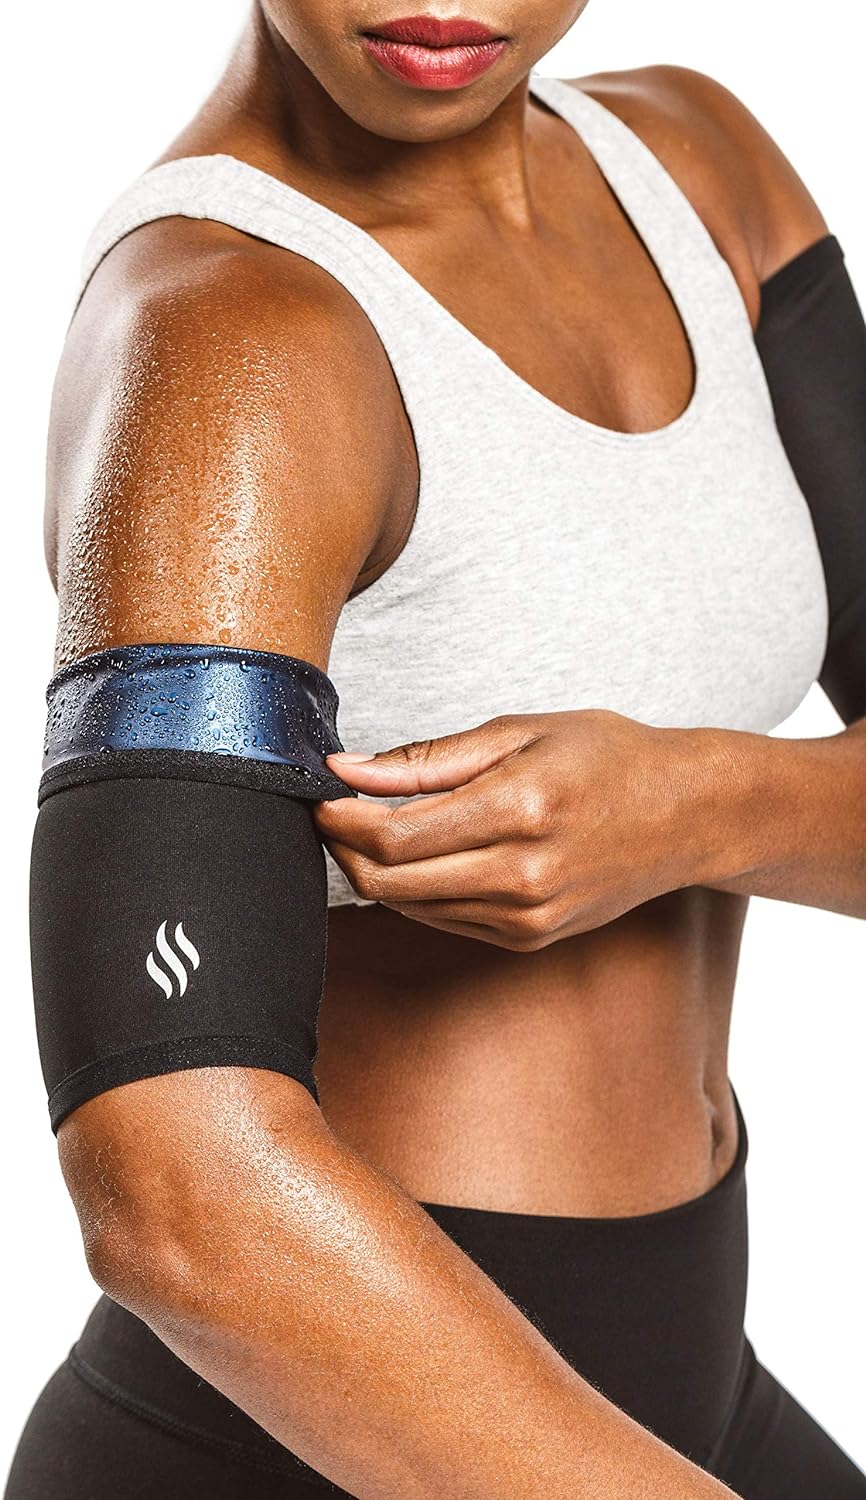 Sweat Shaper Arm Trimmers Review